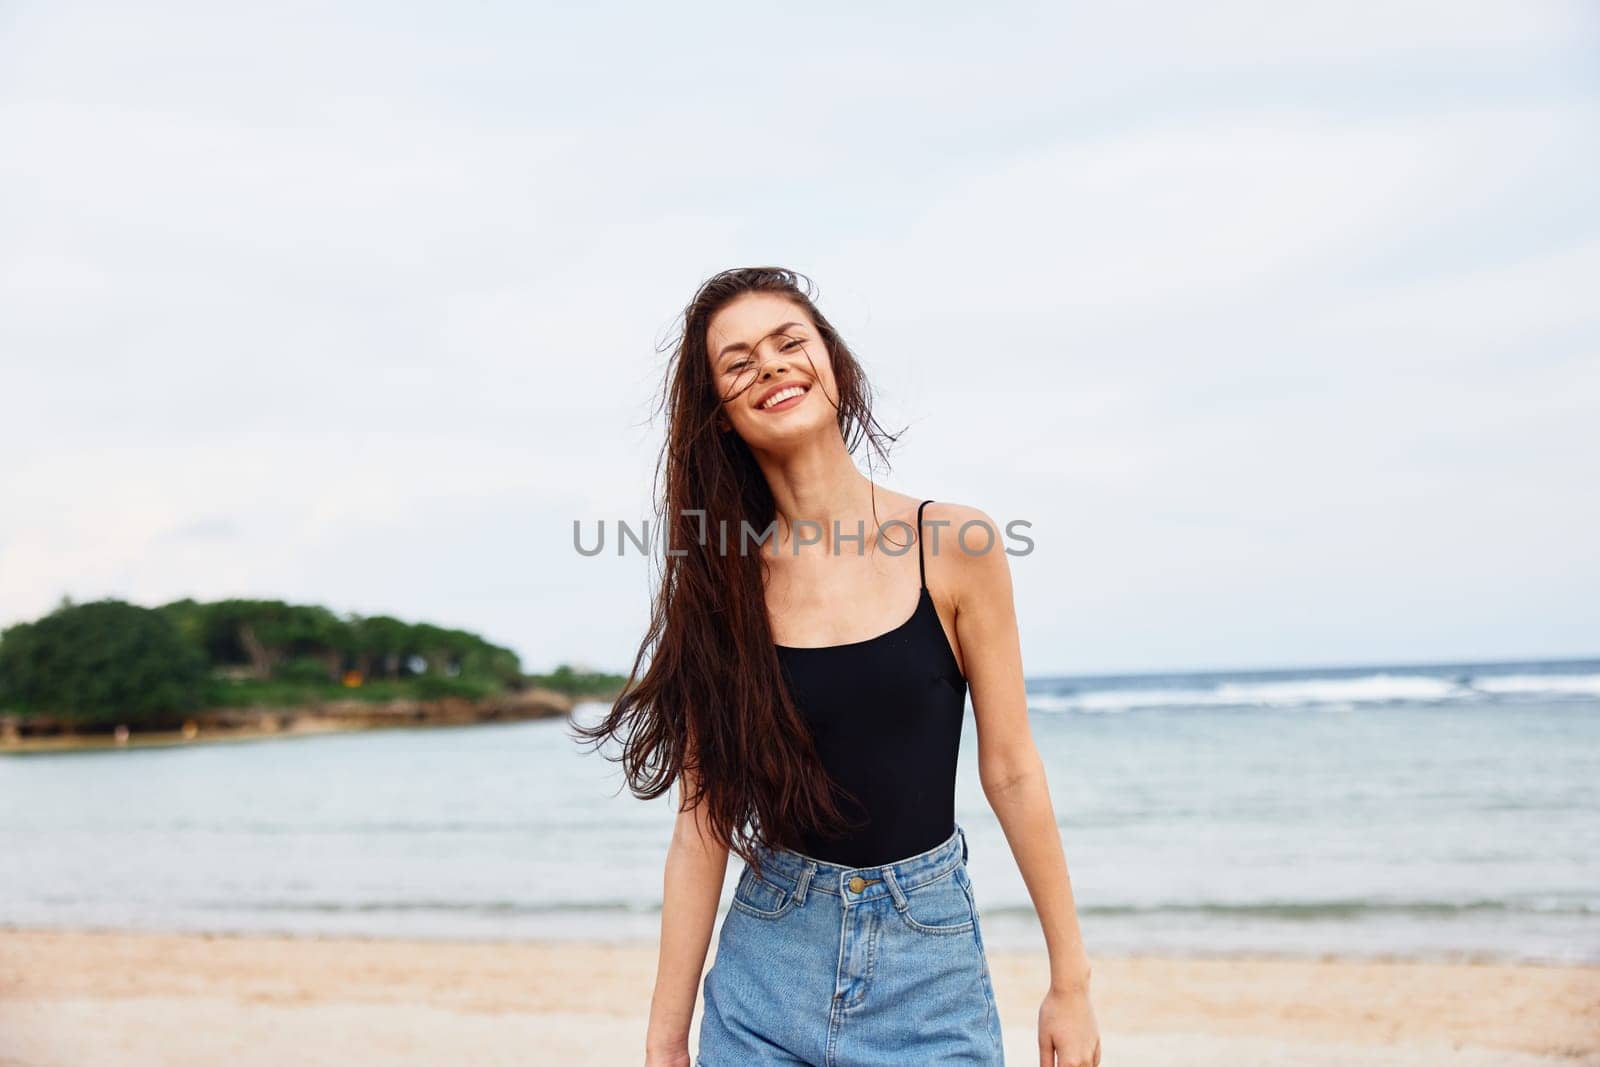 shore woman sexy sunset carefree vacation happy wave smiling lifestyle young summer beach travel freedom tan smile sea activity active running